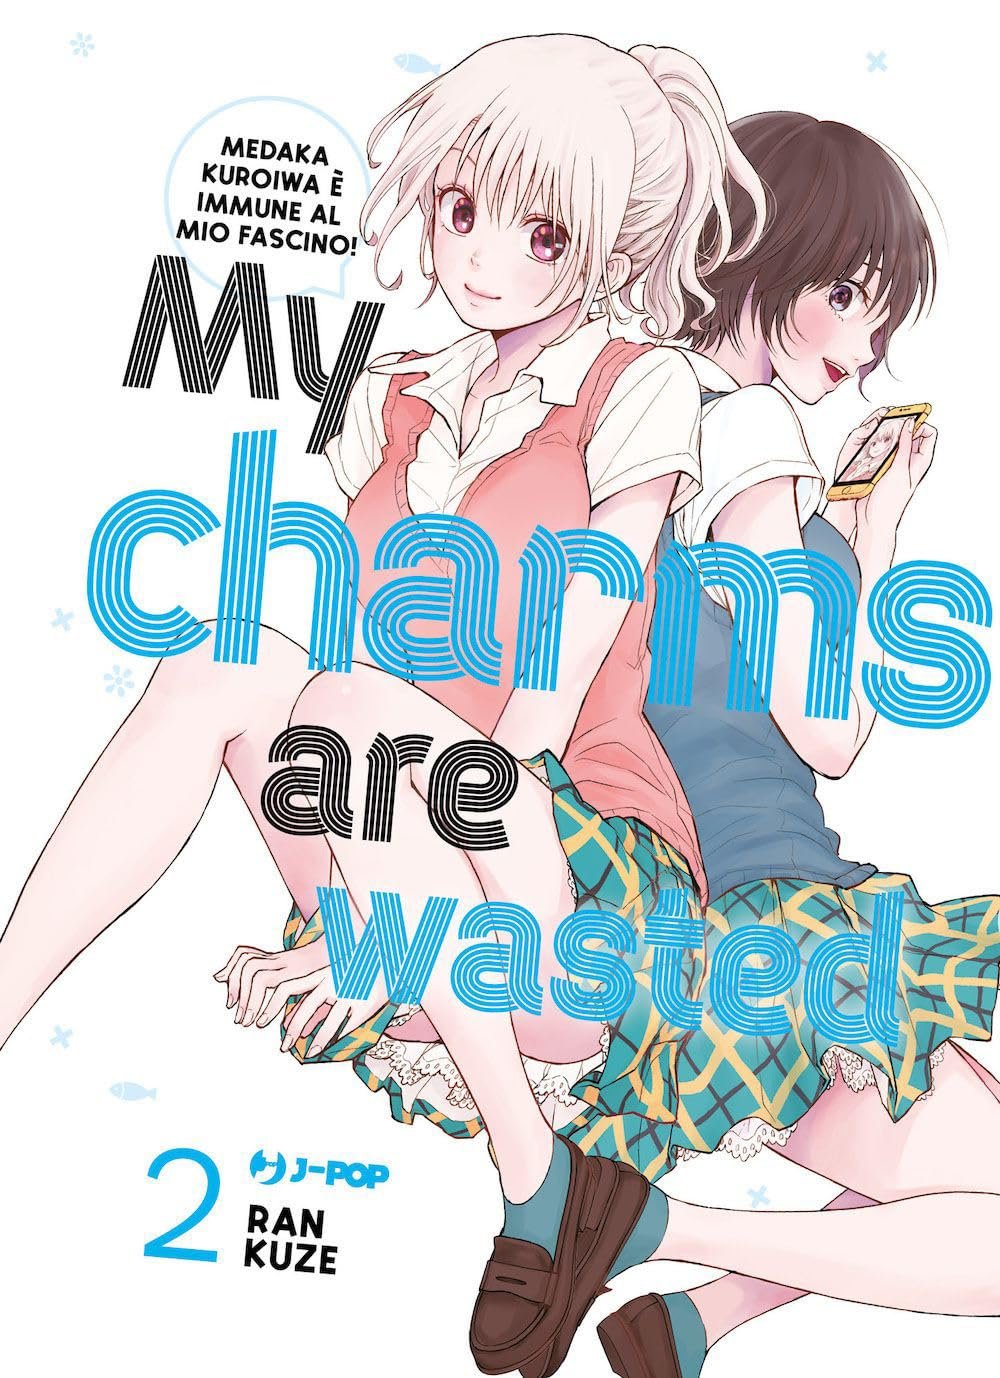 MY CHARMS ARE WASTED 2